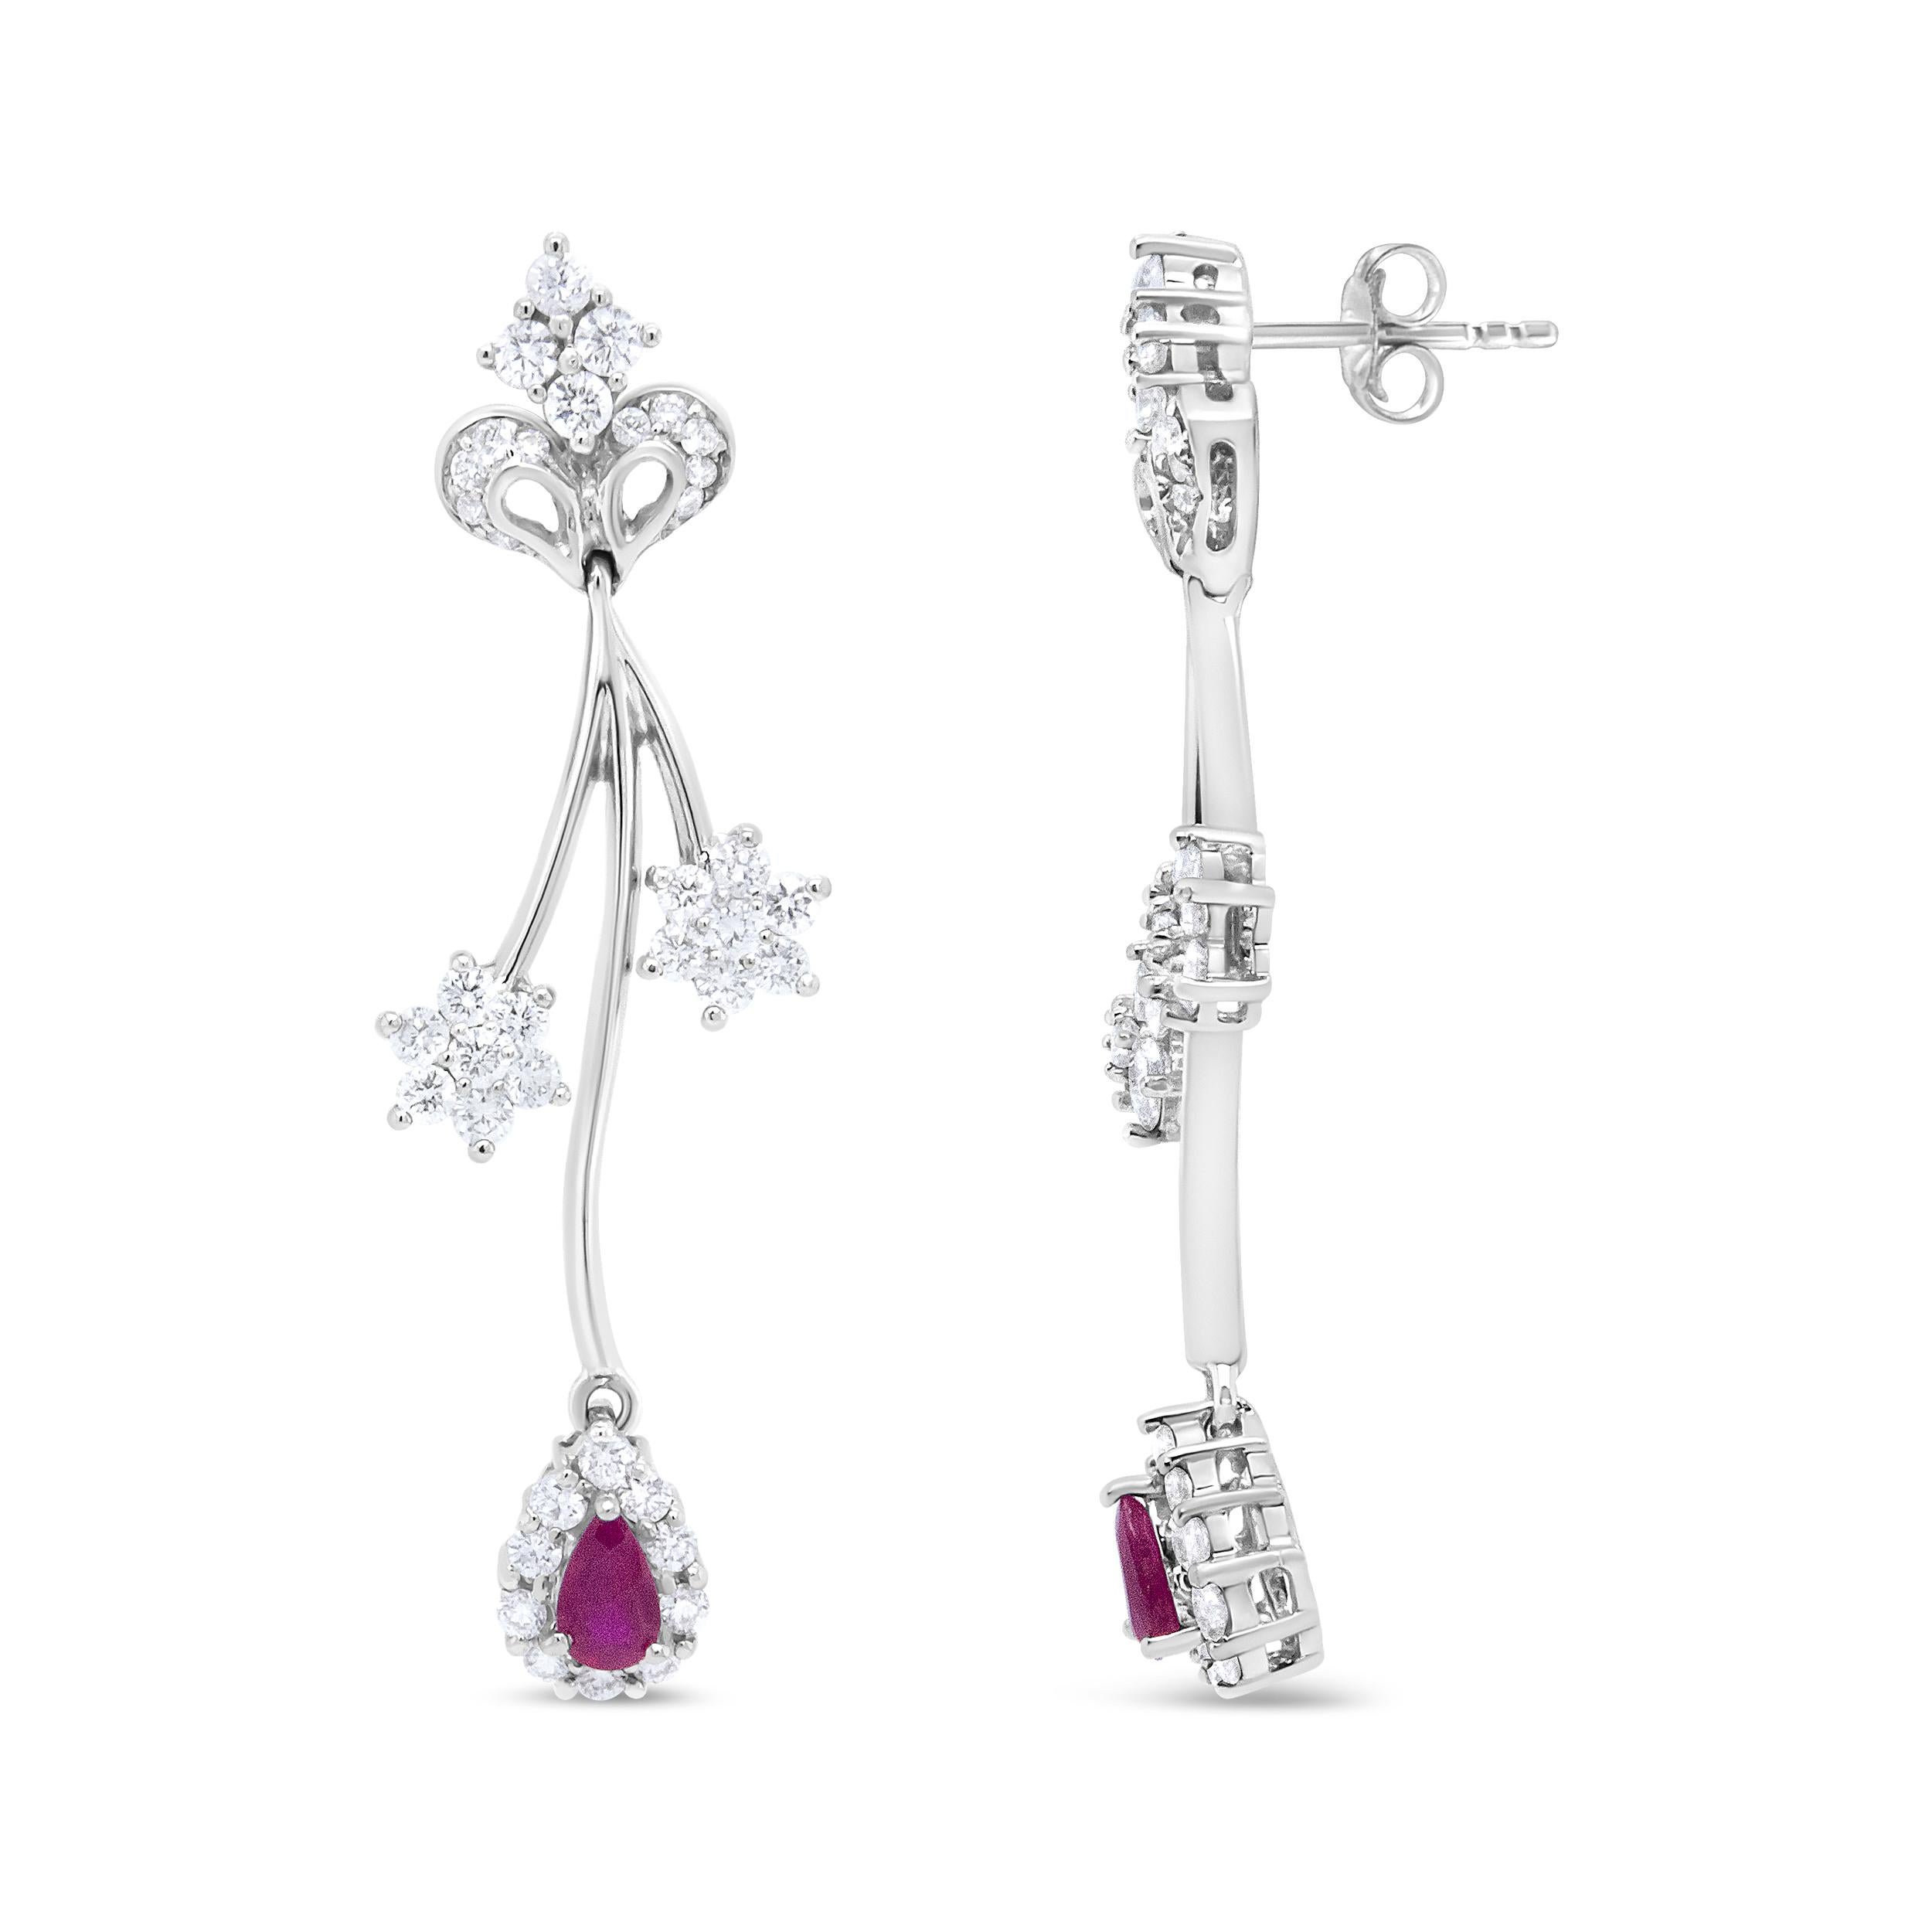 Contemporary 18K White Gold 1 1/4 Carat Diamond and Red Ruby Freeform Dangle Drop Earring